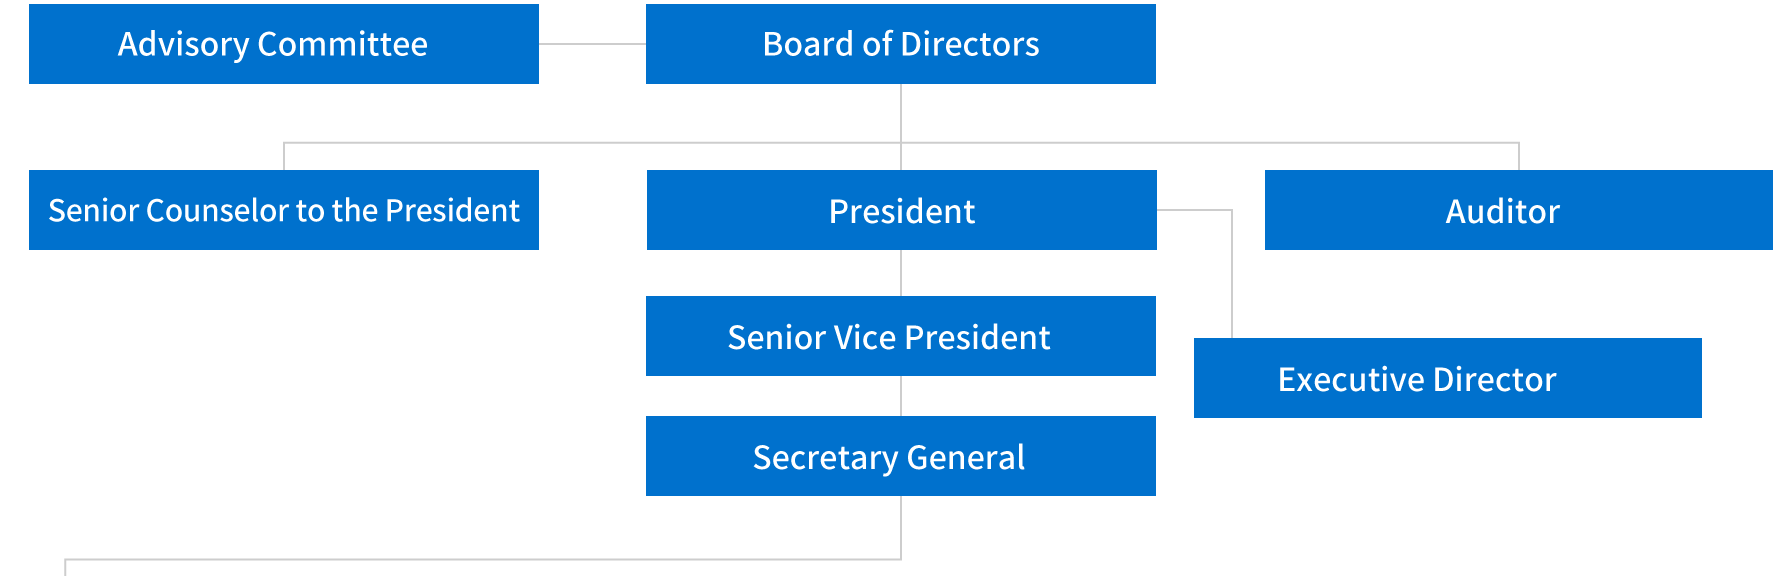 Advisory Committee, Board of Directors, Senior Counselor to the President, President, Auditor, Senior Vice President, Secretary General, Executive Director